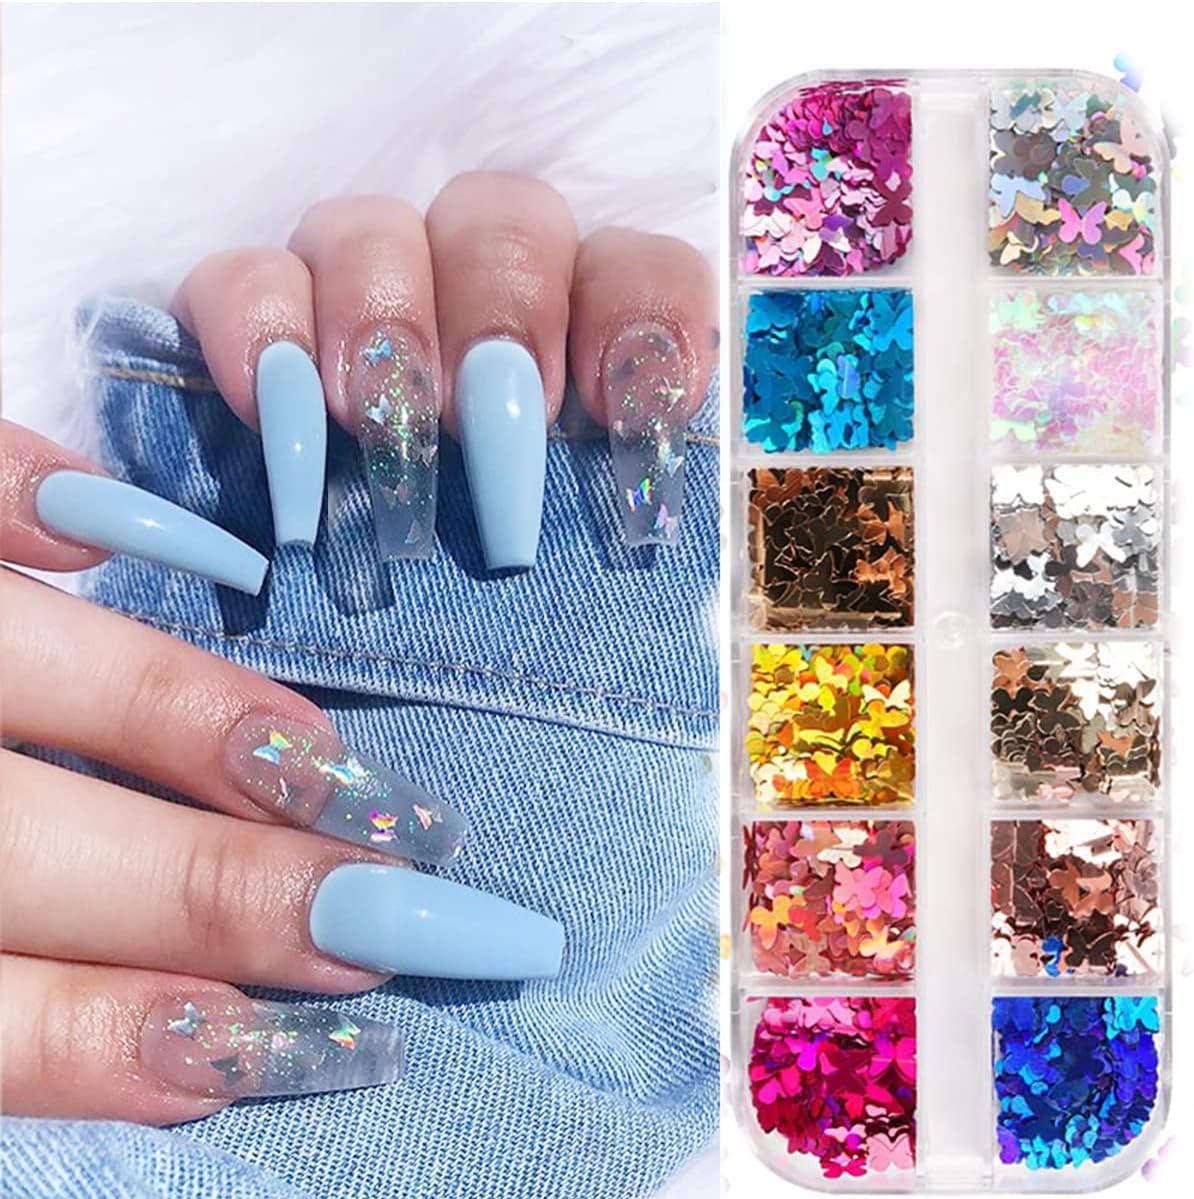 Nail Art Glitter Sequins, Holographic Nail Art Supplies Flakes, 12 Grids  Laser Silver Nail Decals Sparkle Paillette Confetti for Acrylic Nails